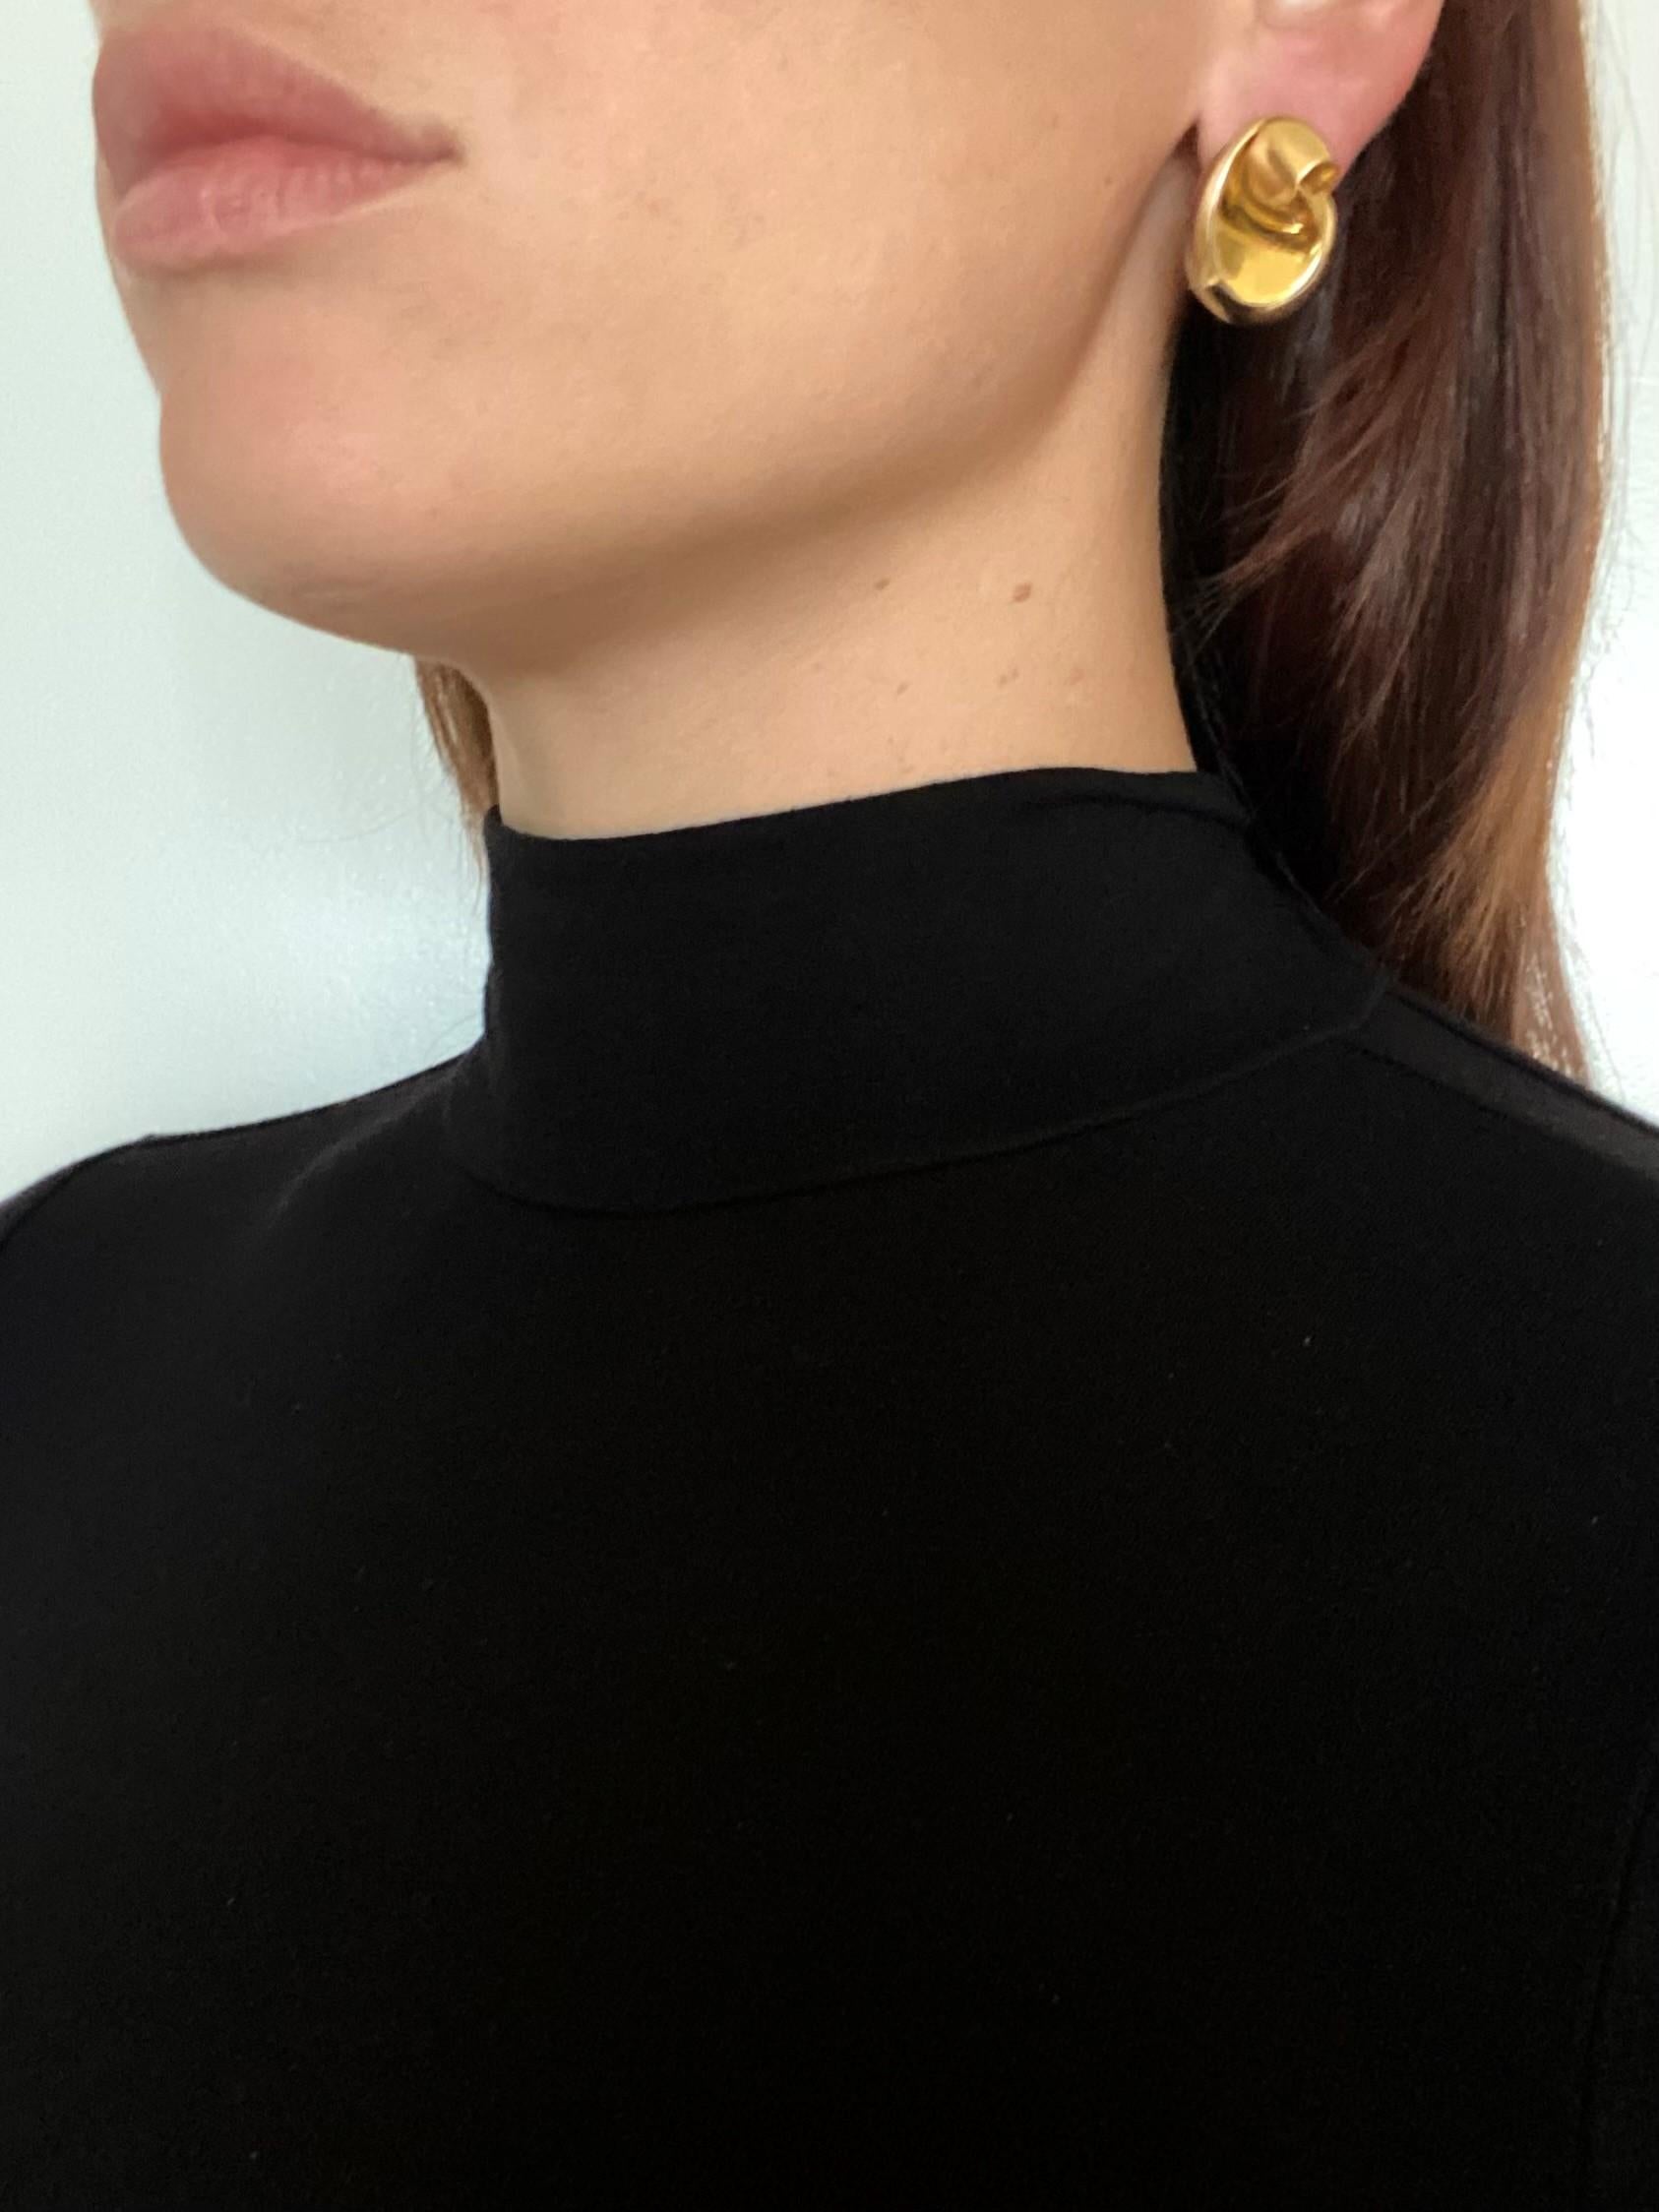 Swirl Vertigo earrings designed by Marina B.

Beautiful swirl pair created in Milano Italy by the jewelry house of Marina Bvlgari. These free-form geometric clips-earrings are part of the iconic collection named Vertigo.They has been crafted in two